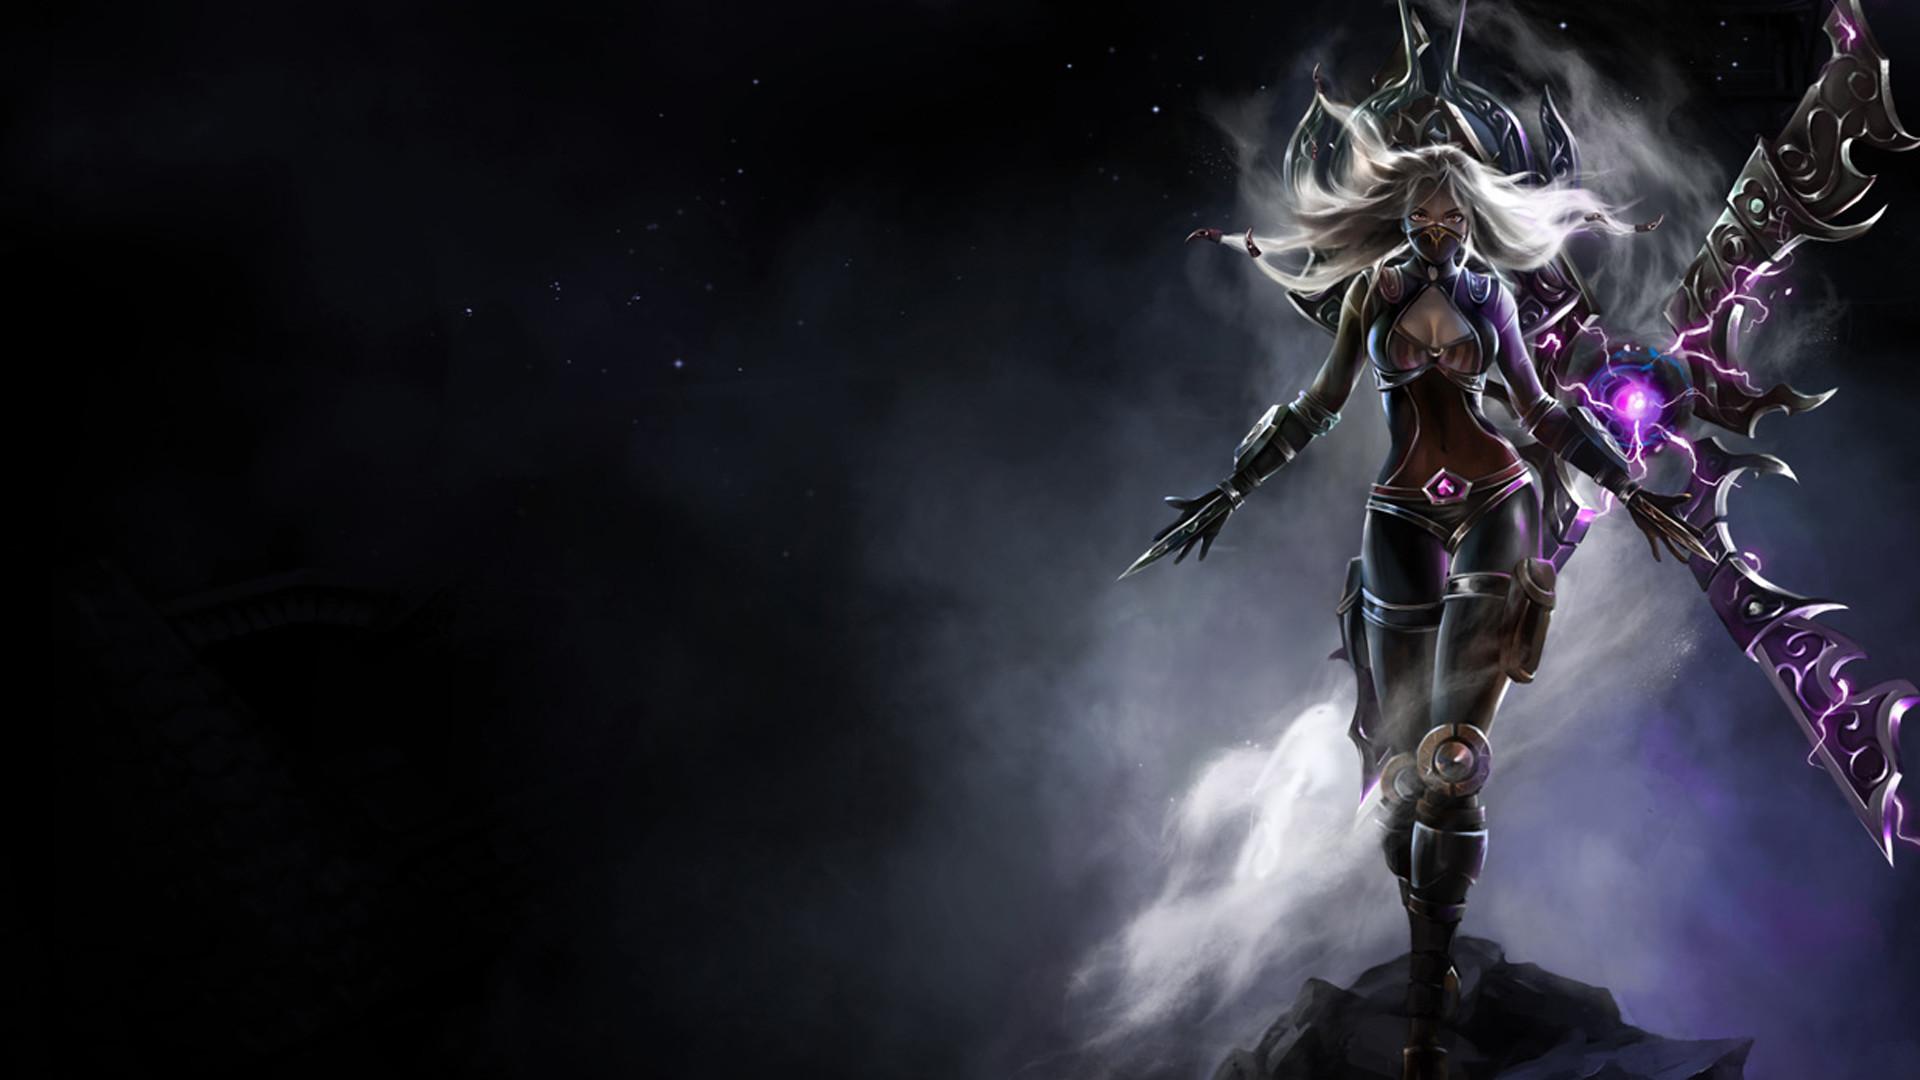 1920x1080 41 Irelia (League Of Legends) HD Wallpapers | Backgrounds - Wallpaper Abyss